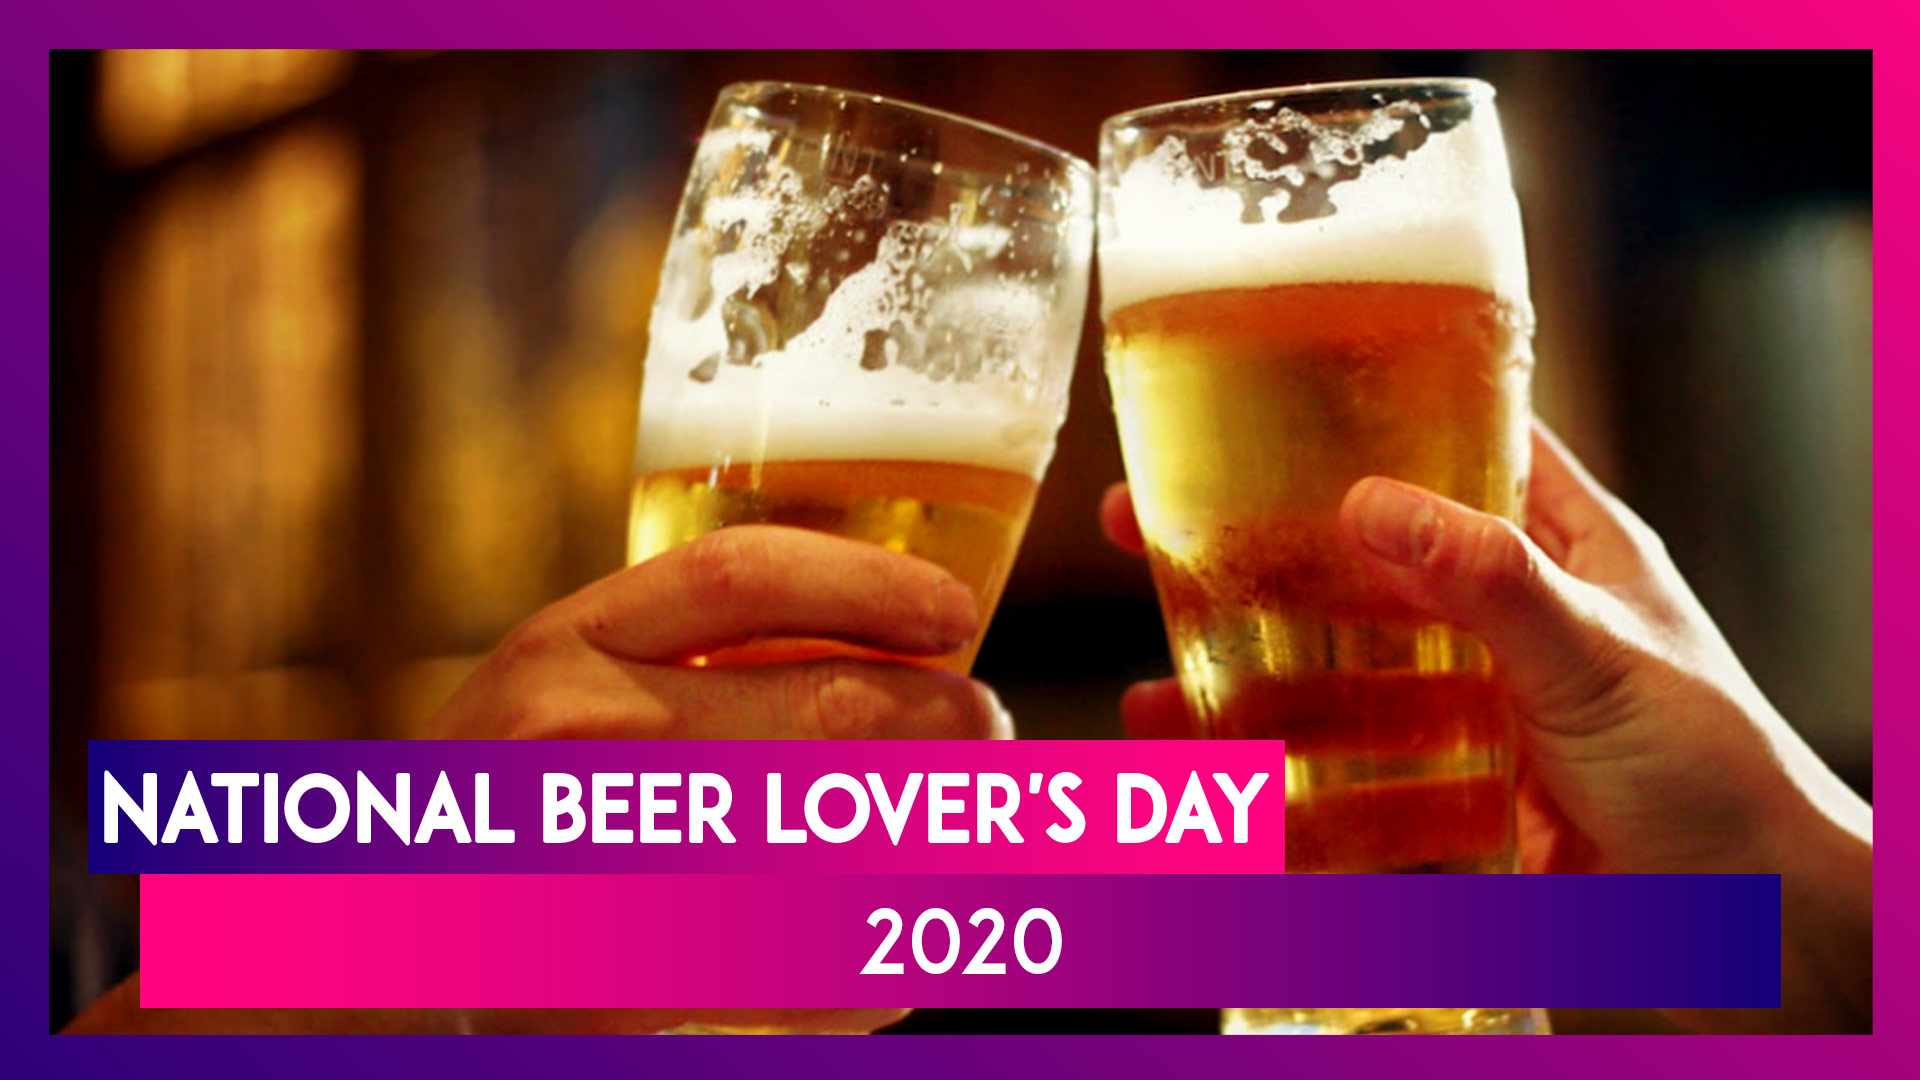 National Beer Lover's Day 2020: Here Are 7 Reasons That Make Beer the Most Loved Alcoholic Beverage